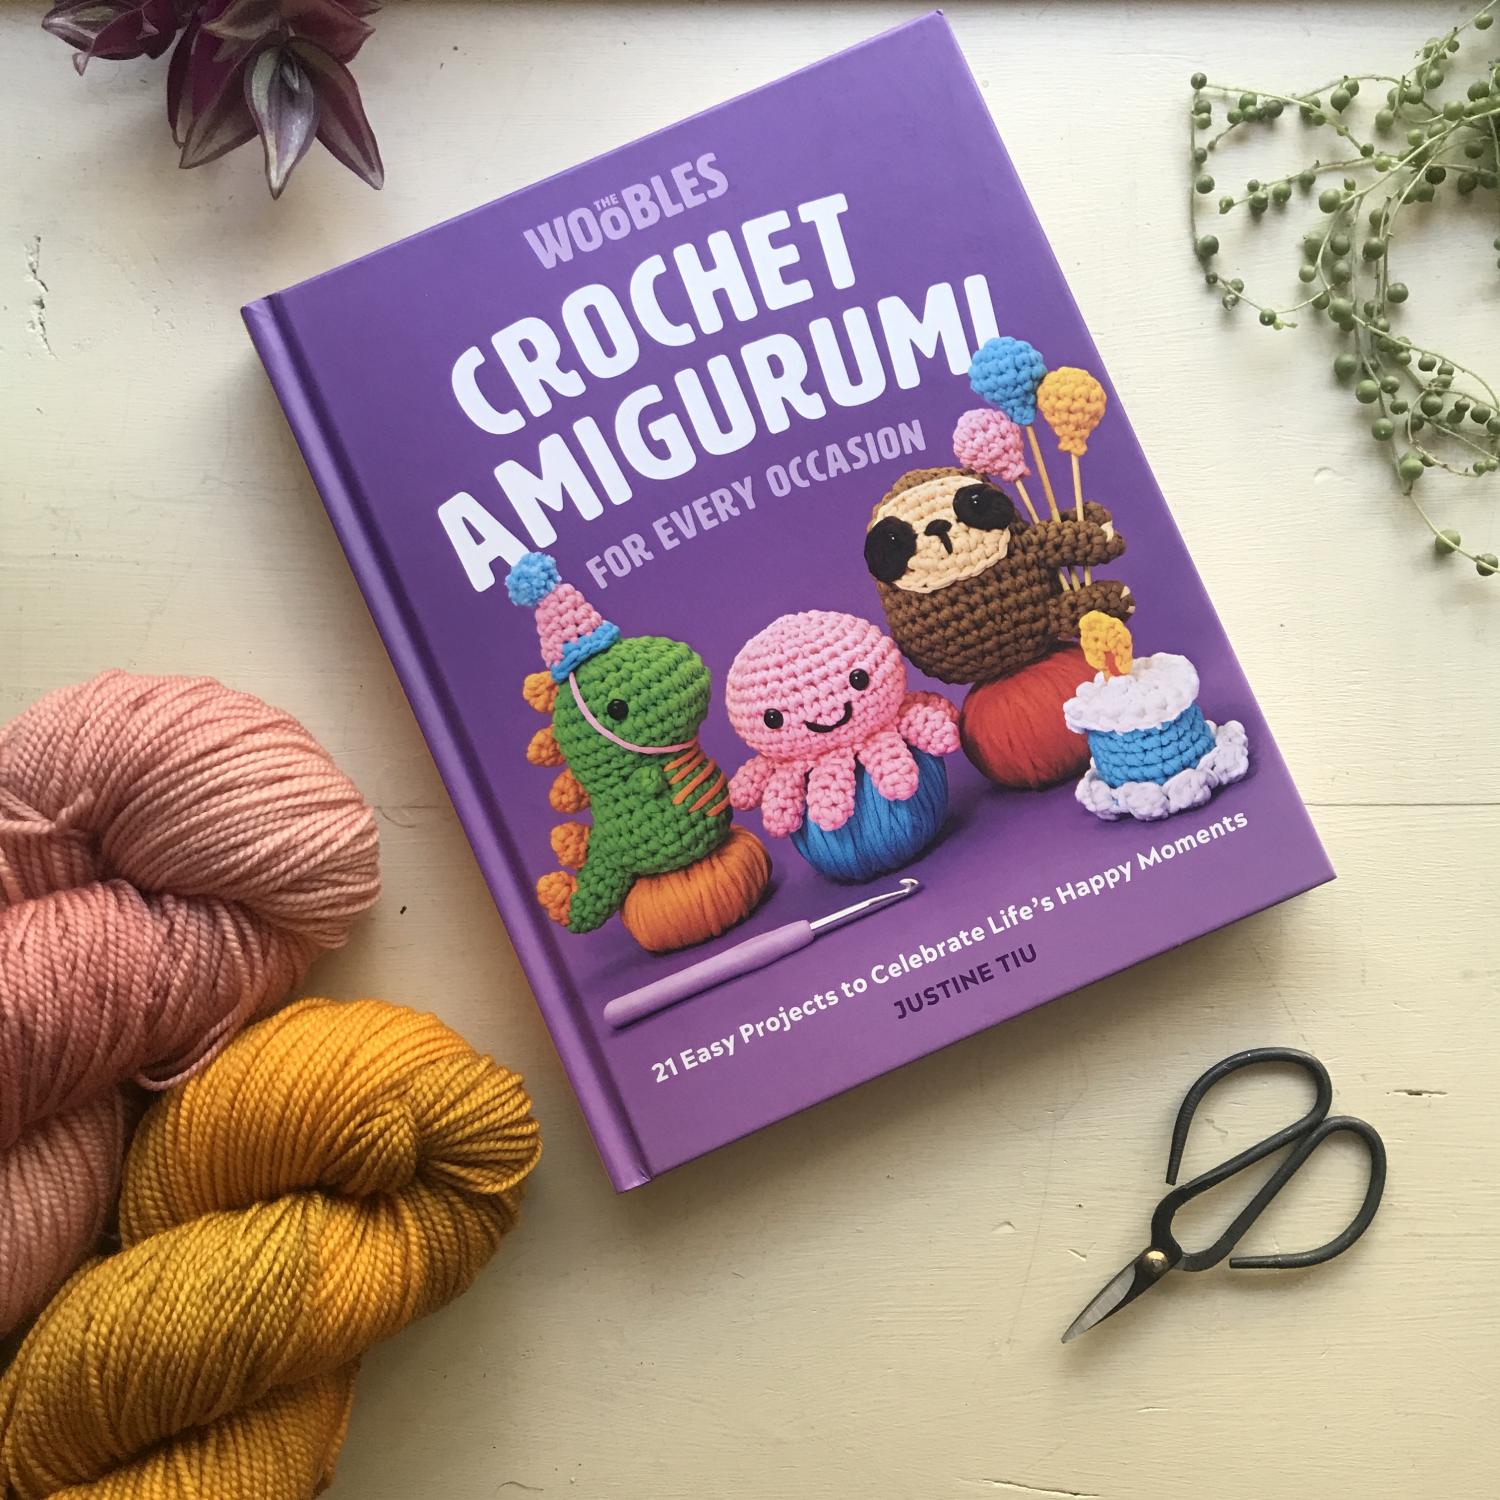 Crochet Amigurumi for Every Occasion By Justine Tiu of The Woobles